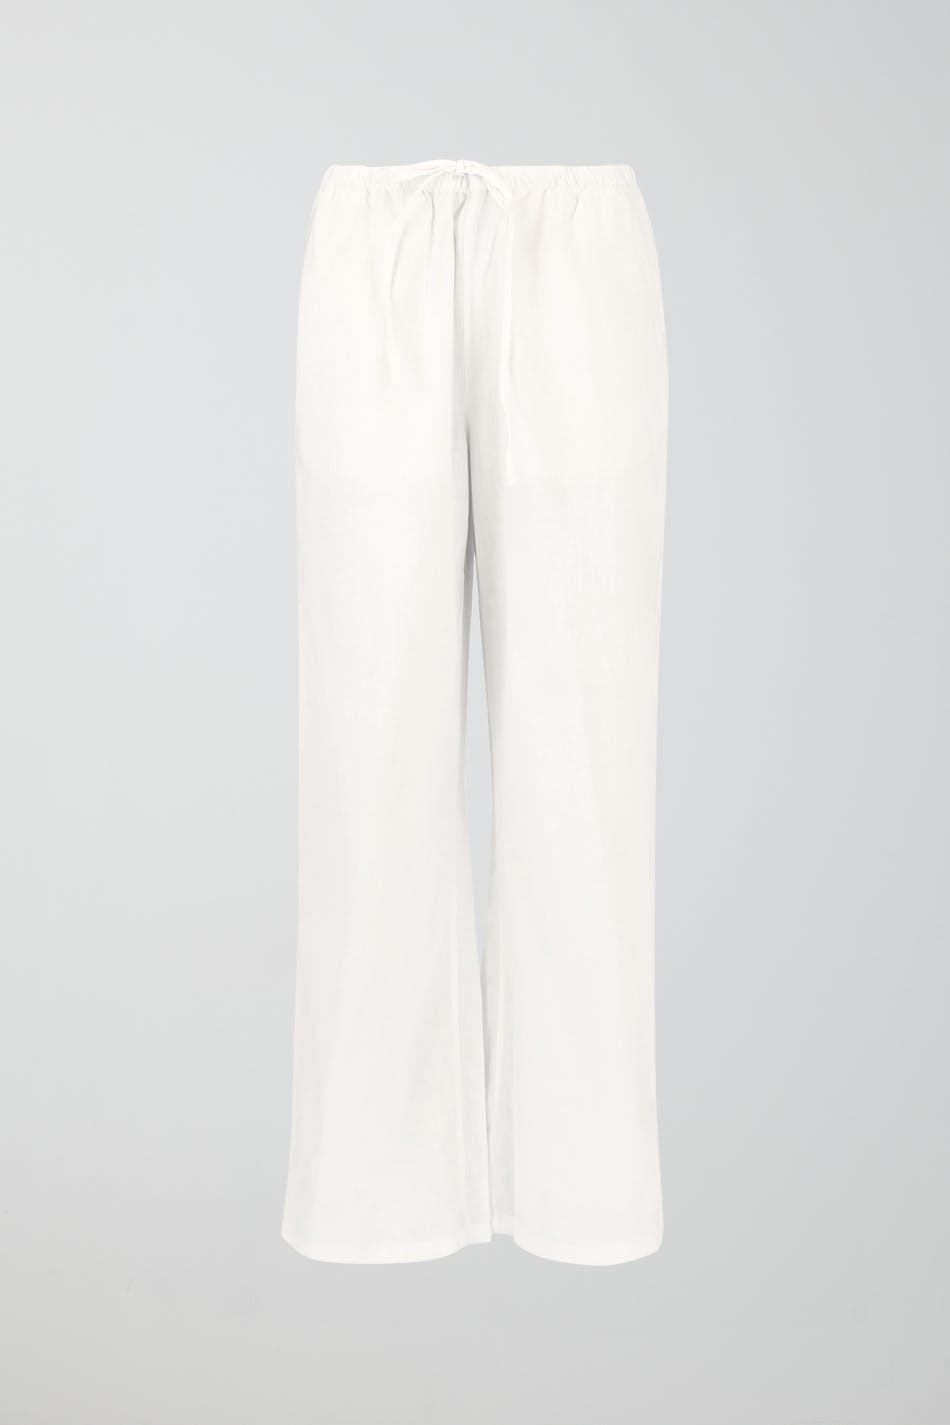 Fabindia Trousers and Pants  Buy Fabindia White Linen Blend Woven Slim Fit  Pant Online  Nykaa Fashion